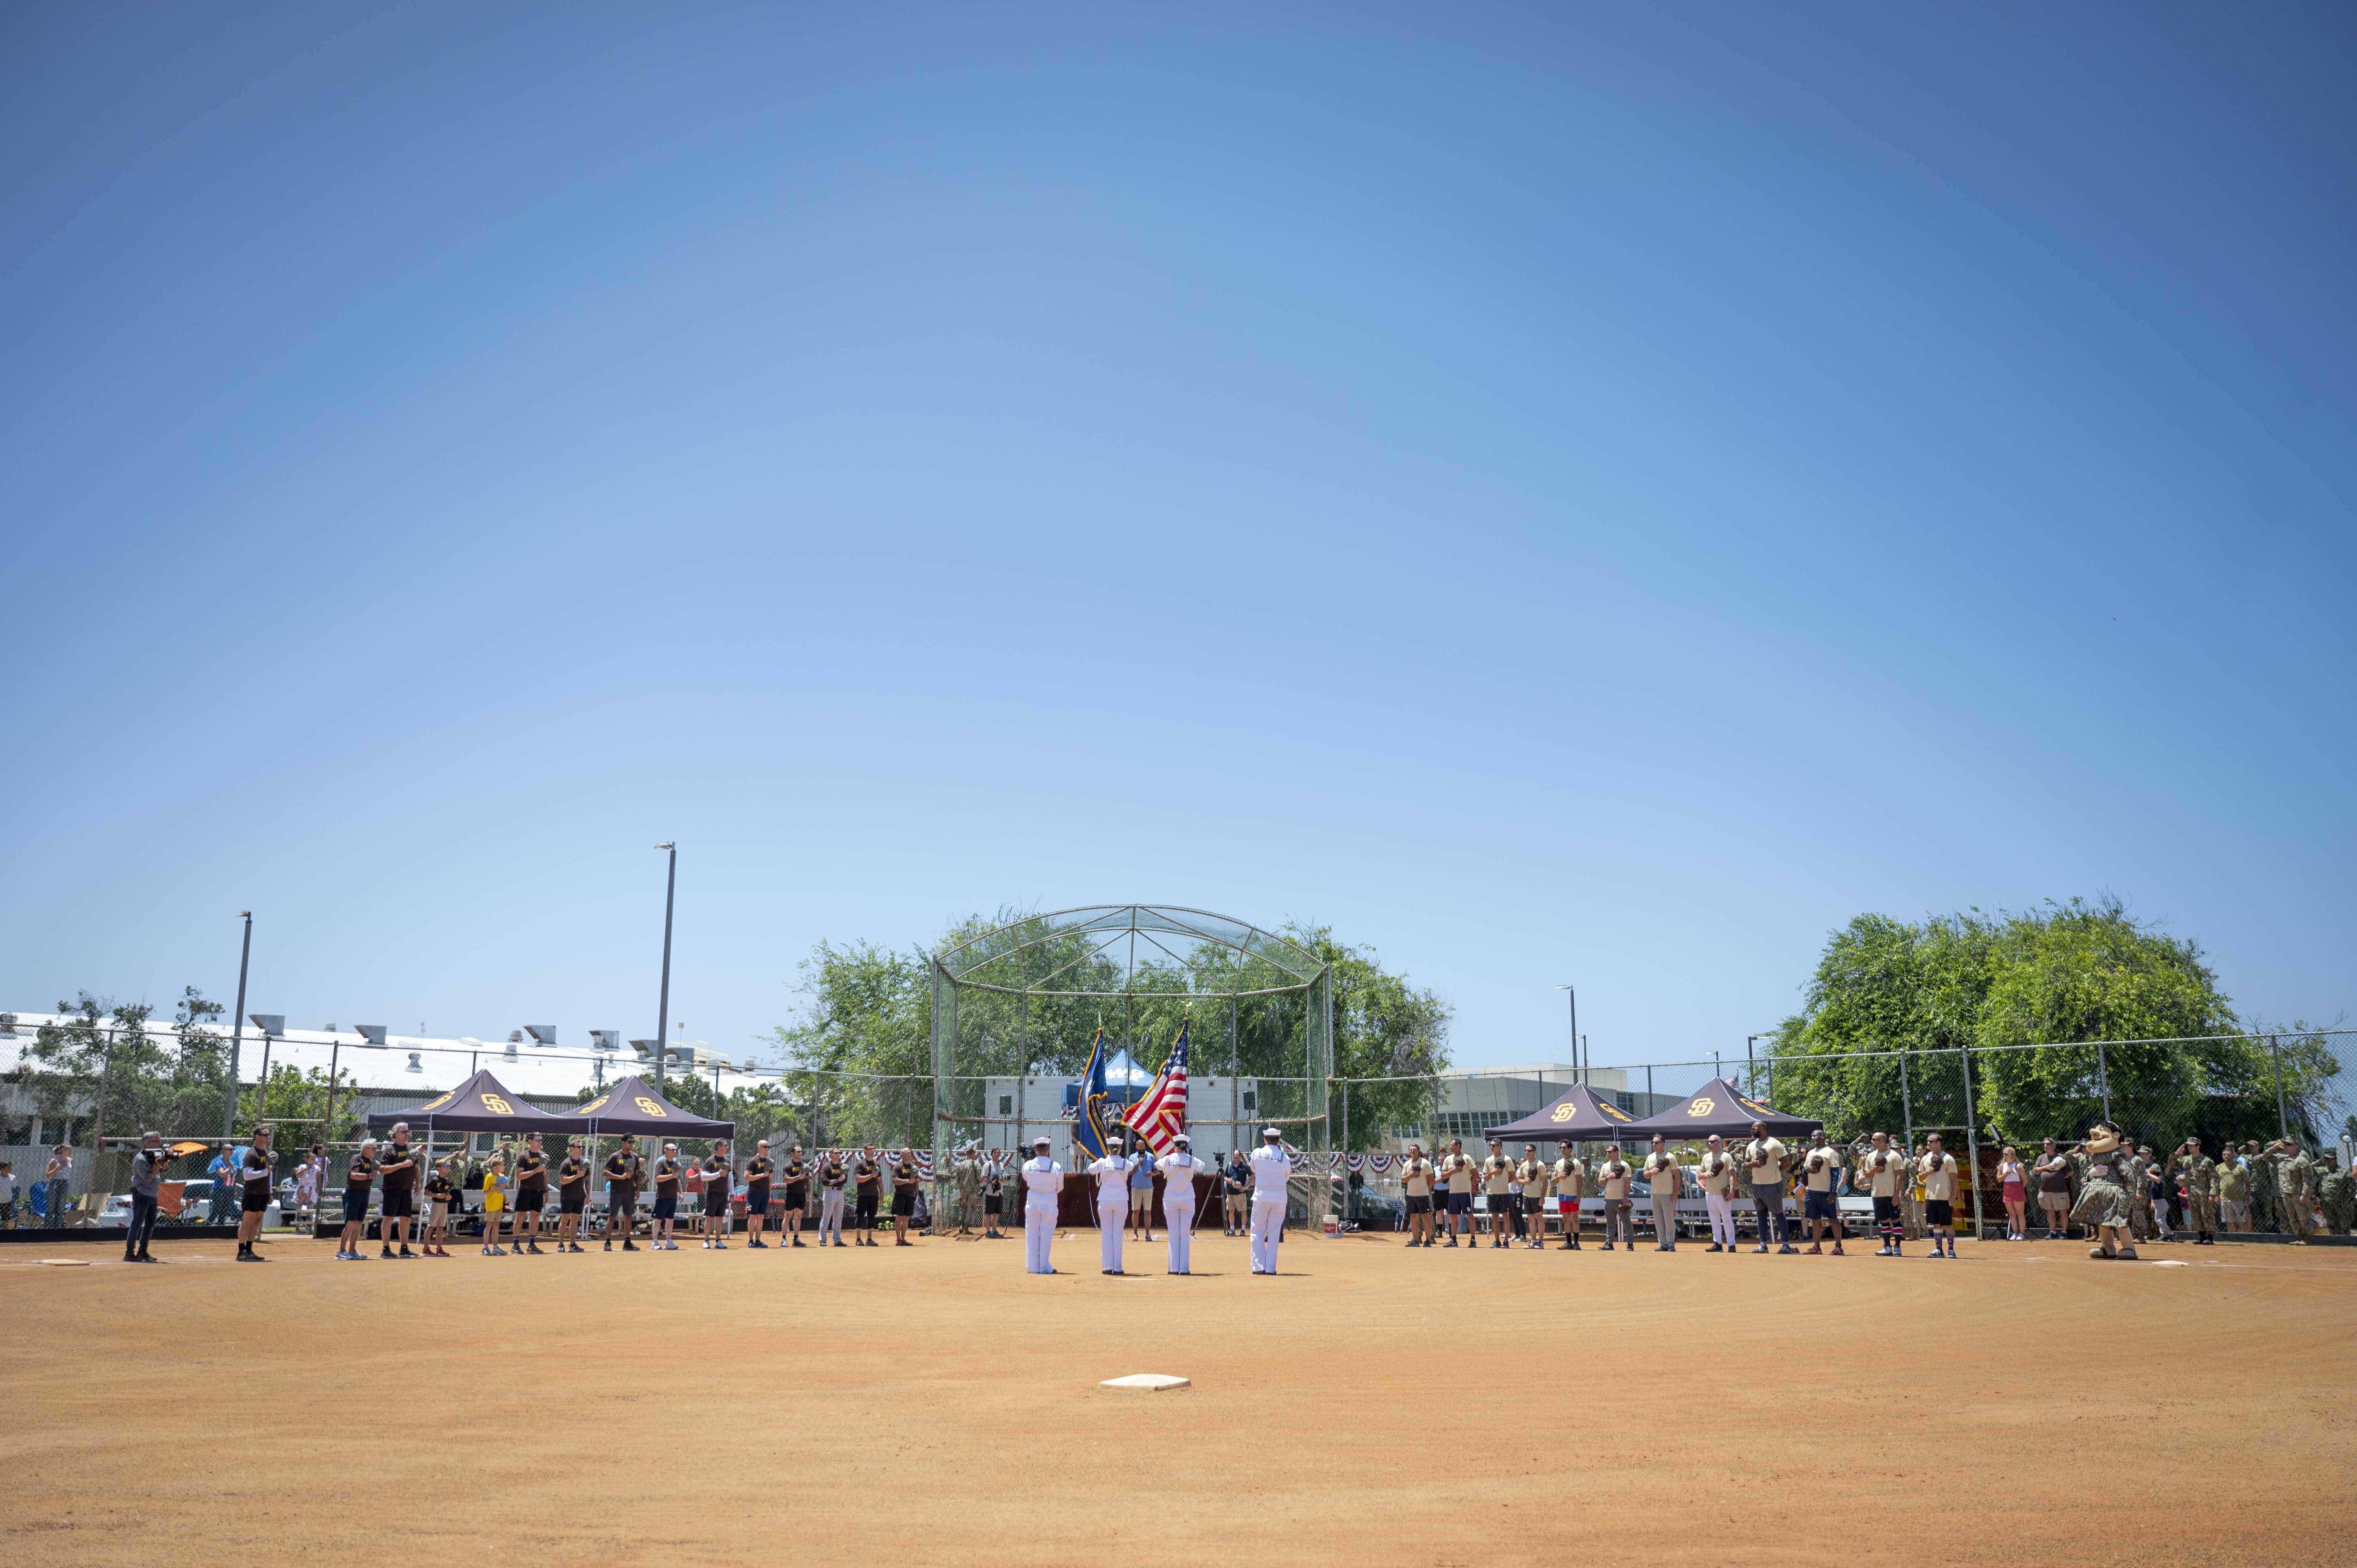 Sailors assigned to Naval Special Warfare units play a softball game against former San Diego Padres baseball players at Naval Amphibious Base Coronado.